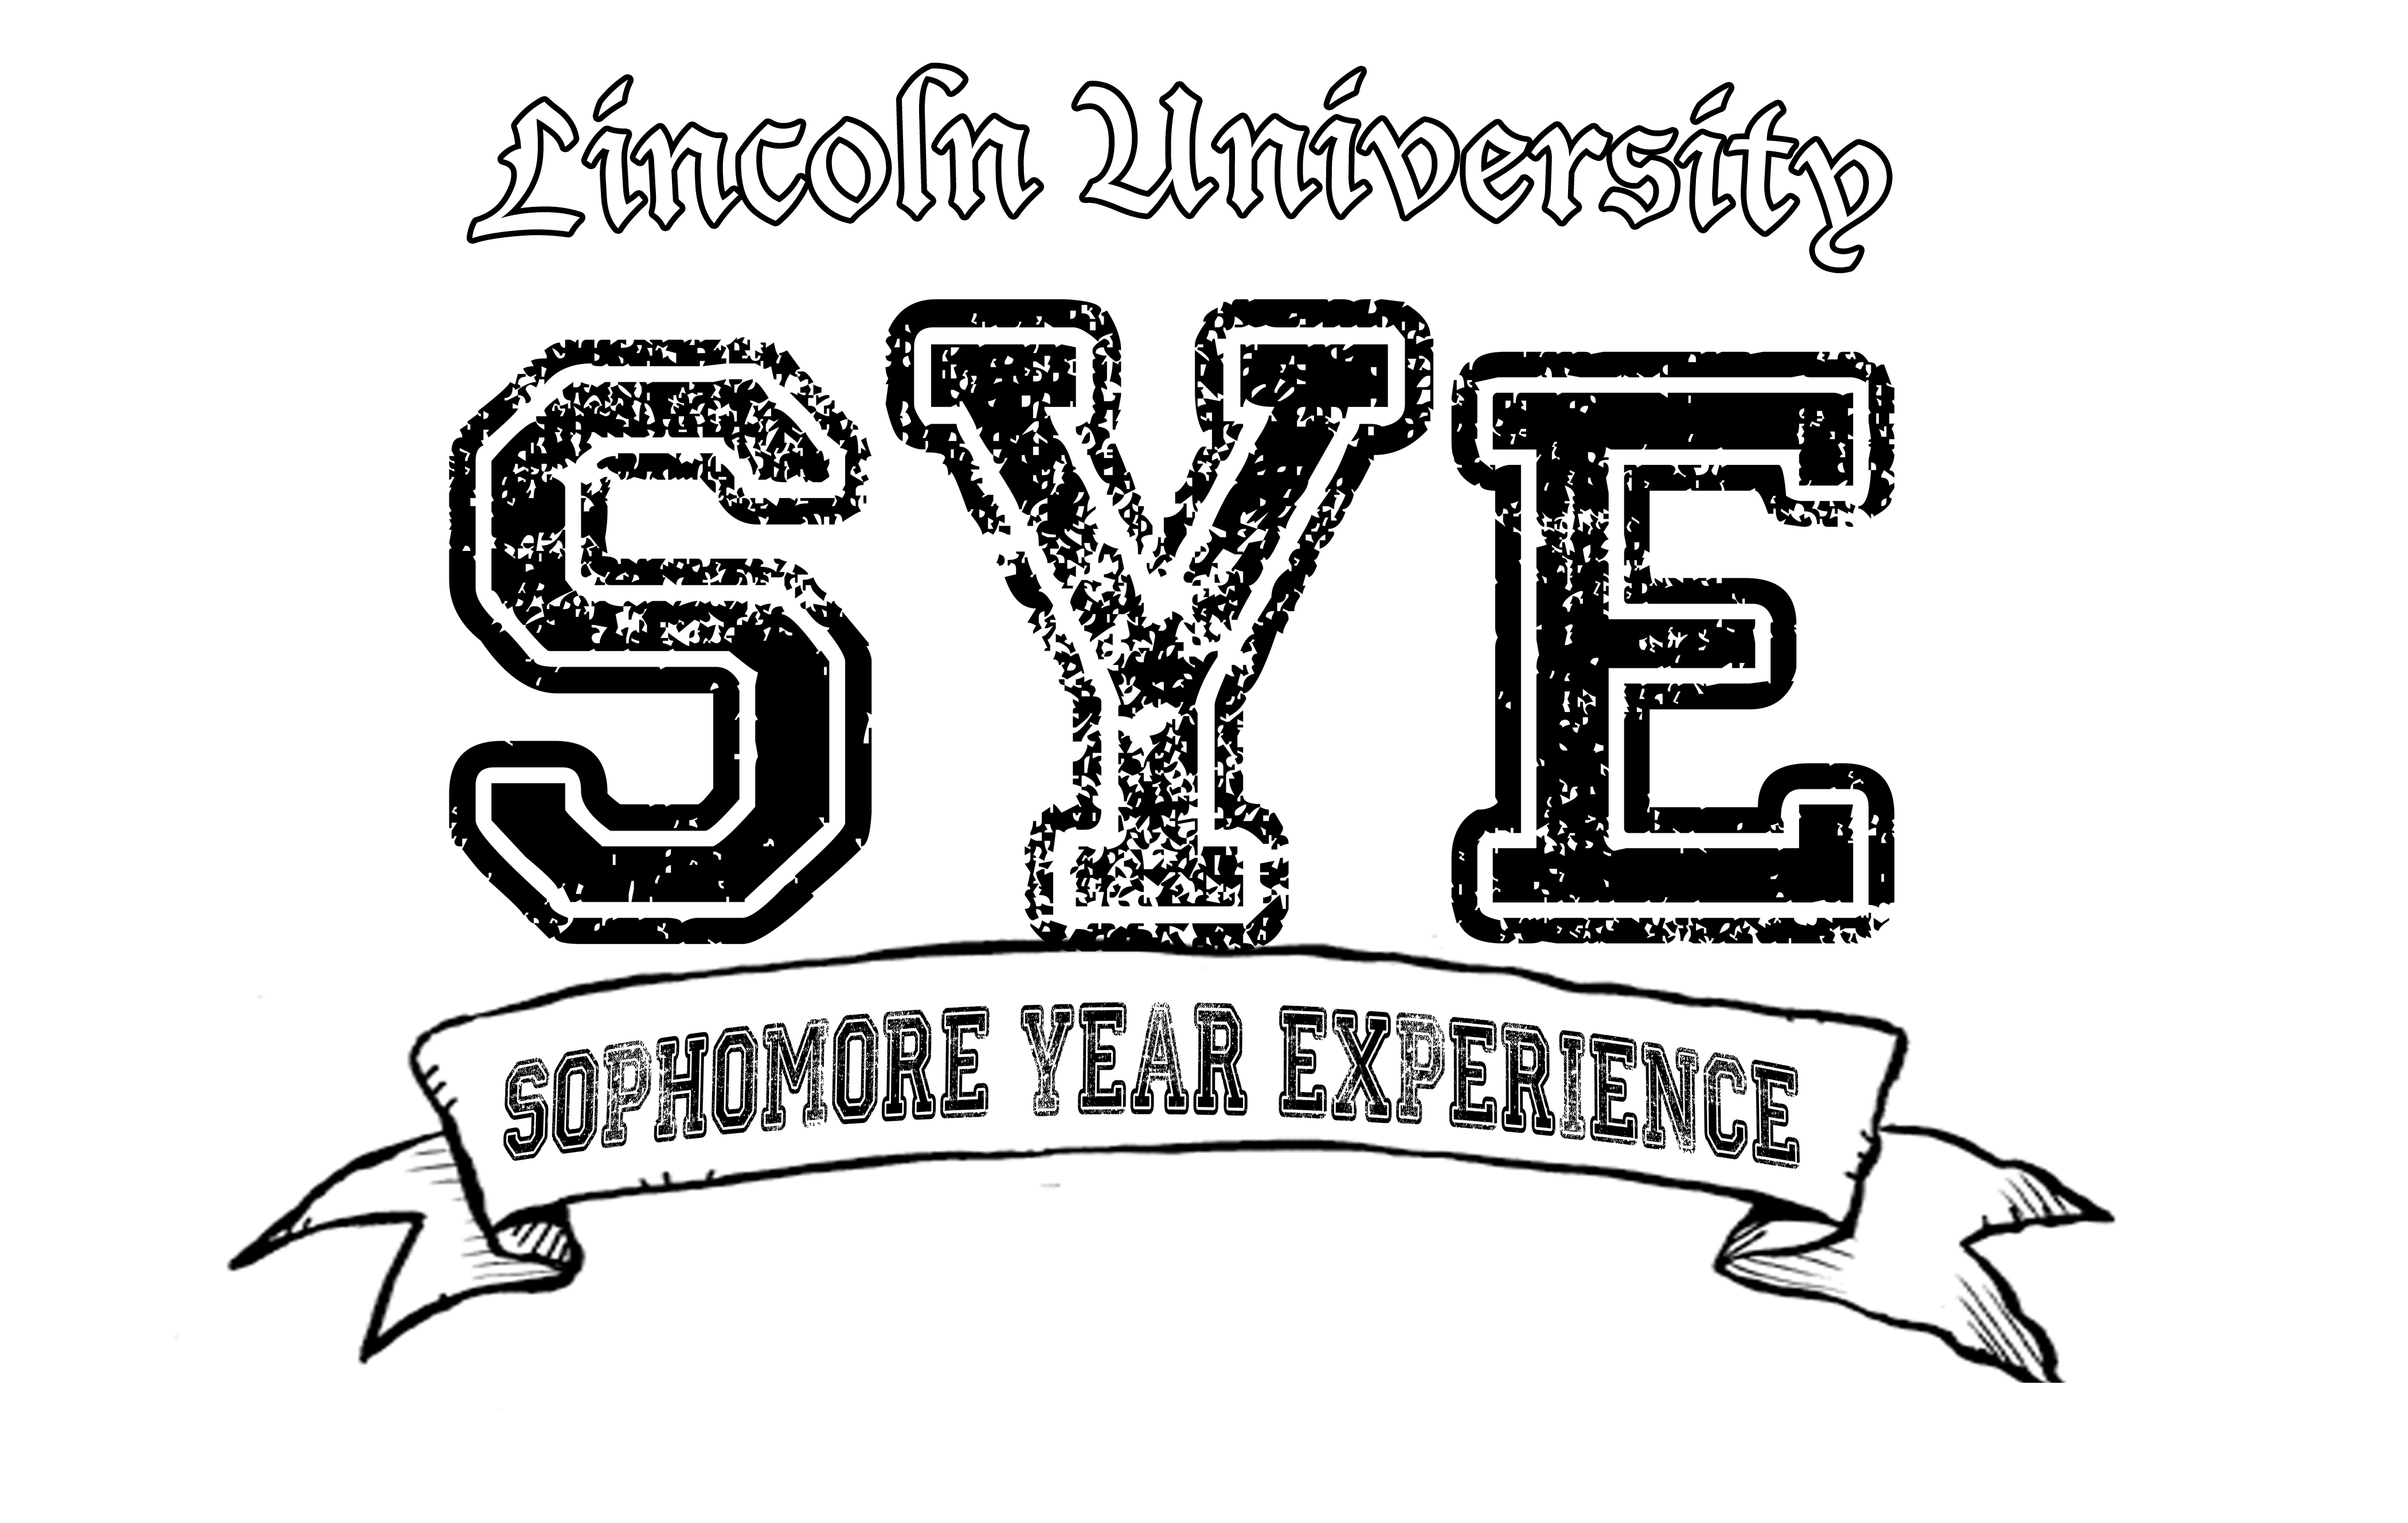 Sophomore Year Experience logo